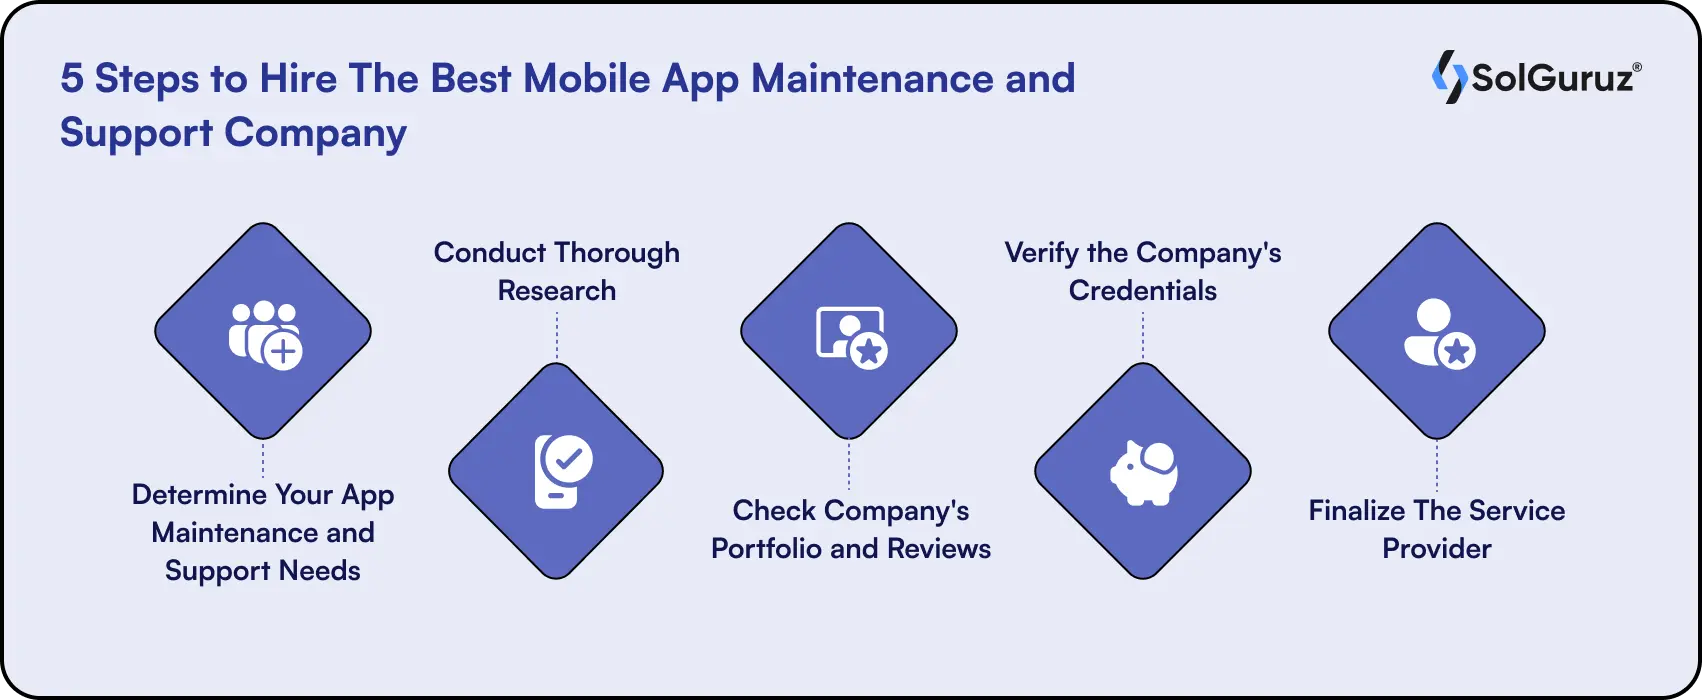 5 Steps to Hire The Best Mobile App Maintenance and Support Company